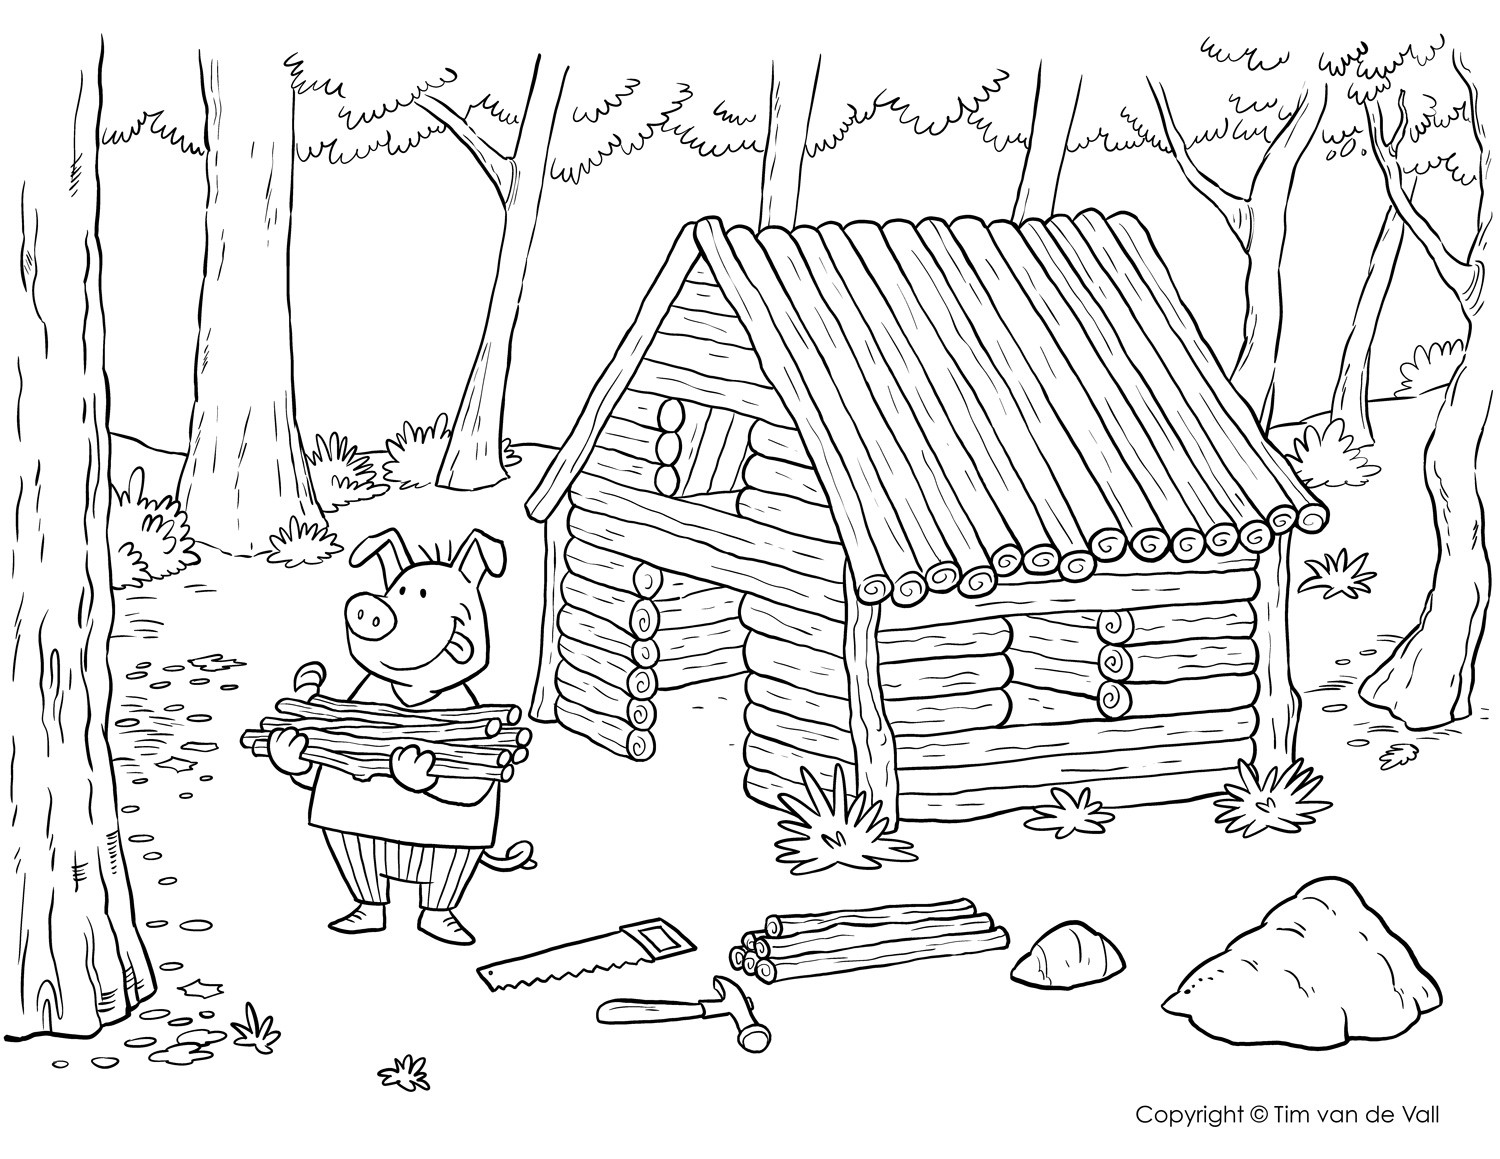 Preschool Coloring Sheets For The 3 Little Pigs Houses
 Three Little Pigs Coloring Pages – The Three Little Pigs Story